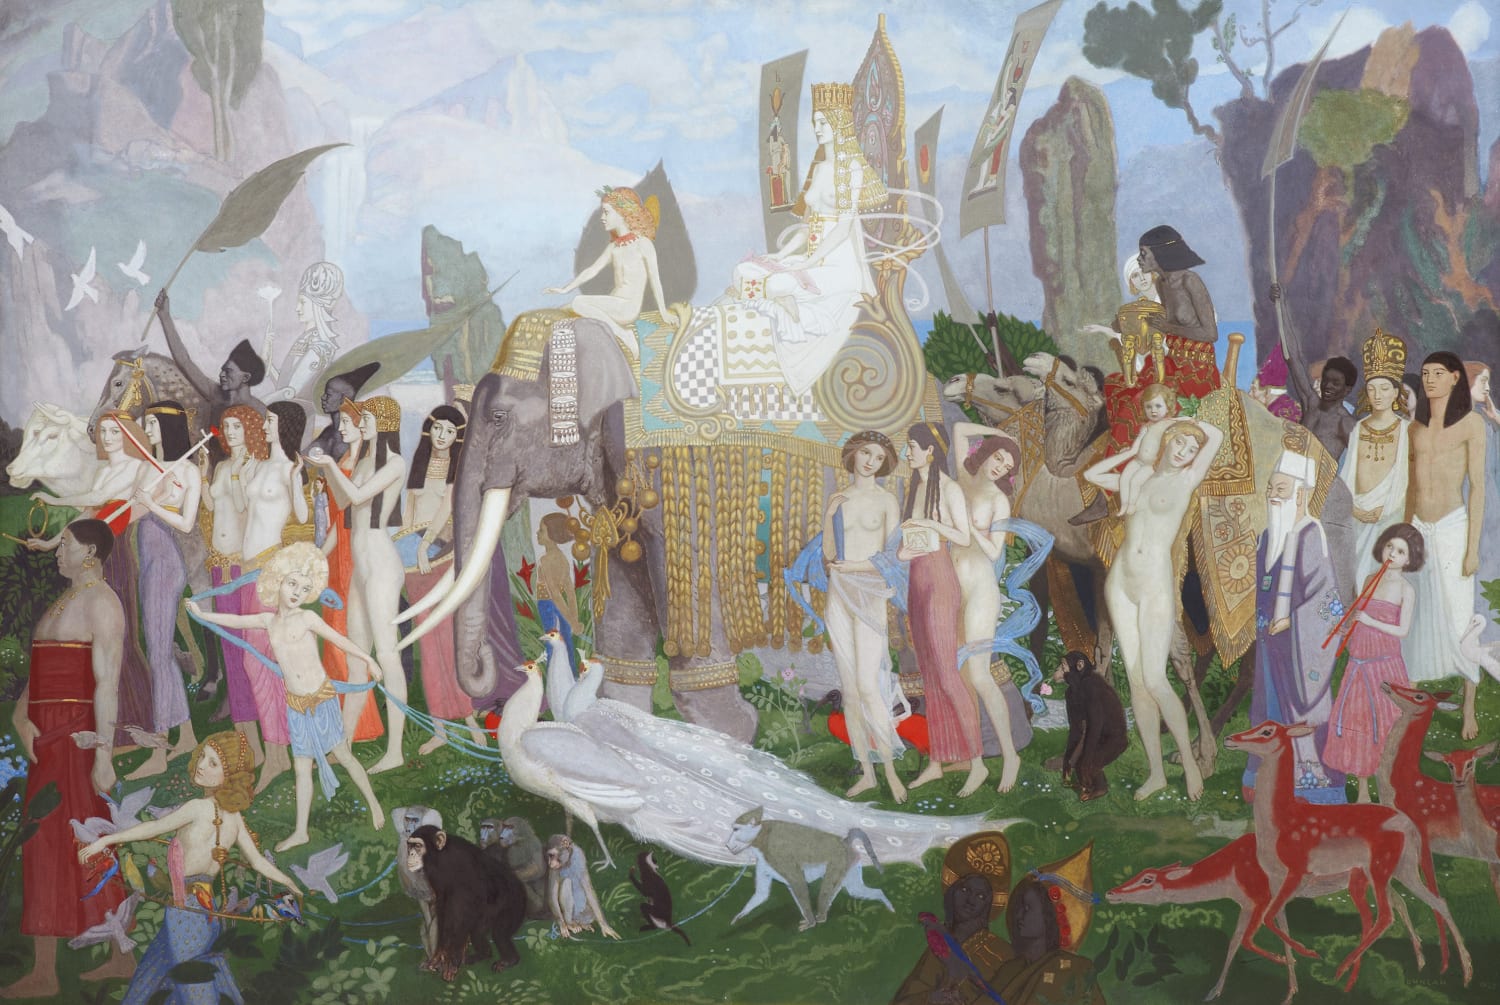 John Duncan RSA (1866-1945), Ivory, Apes and Peacocks  tempera on gesso board, 1923, 101.6 x 152.4cm  RSA Diploma Collection Deposit, 1923. 2000.062